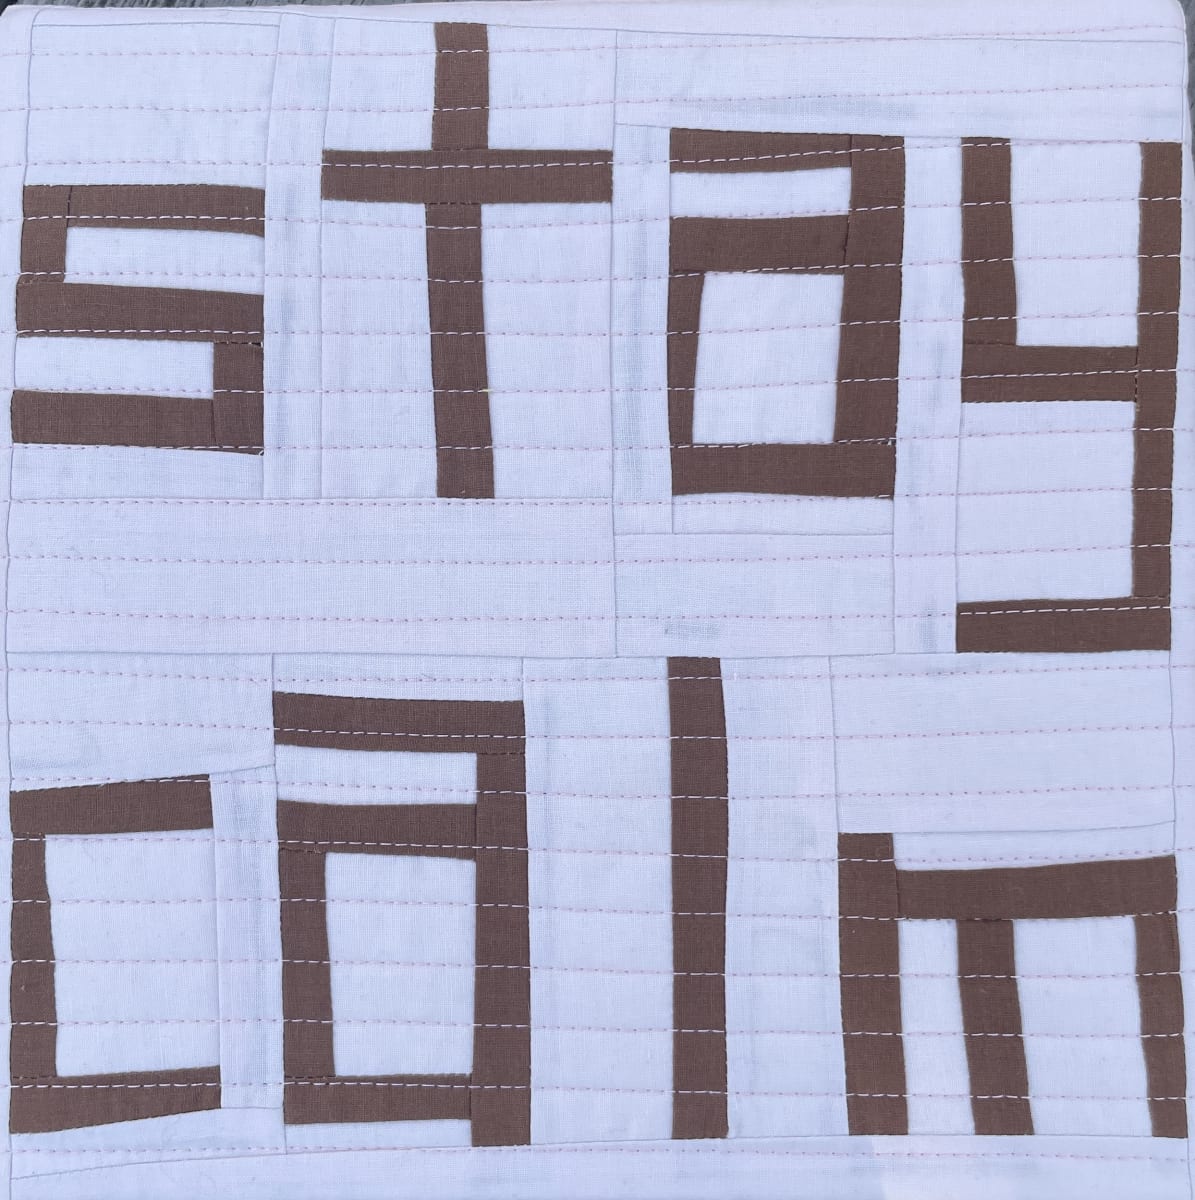 Thoughts for Troubled Times: Stay Calm by Megan Haidet 